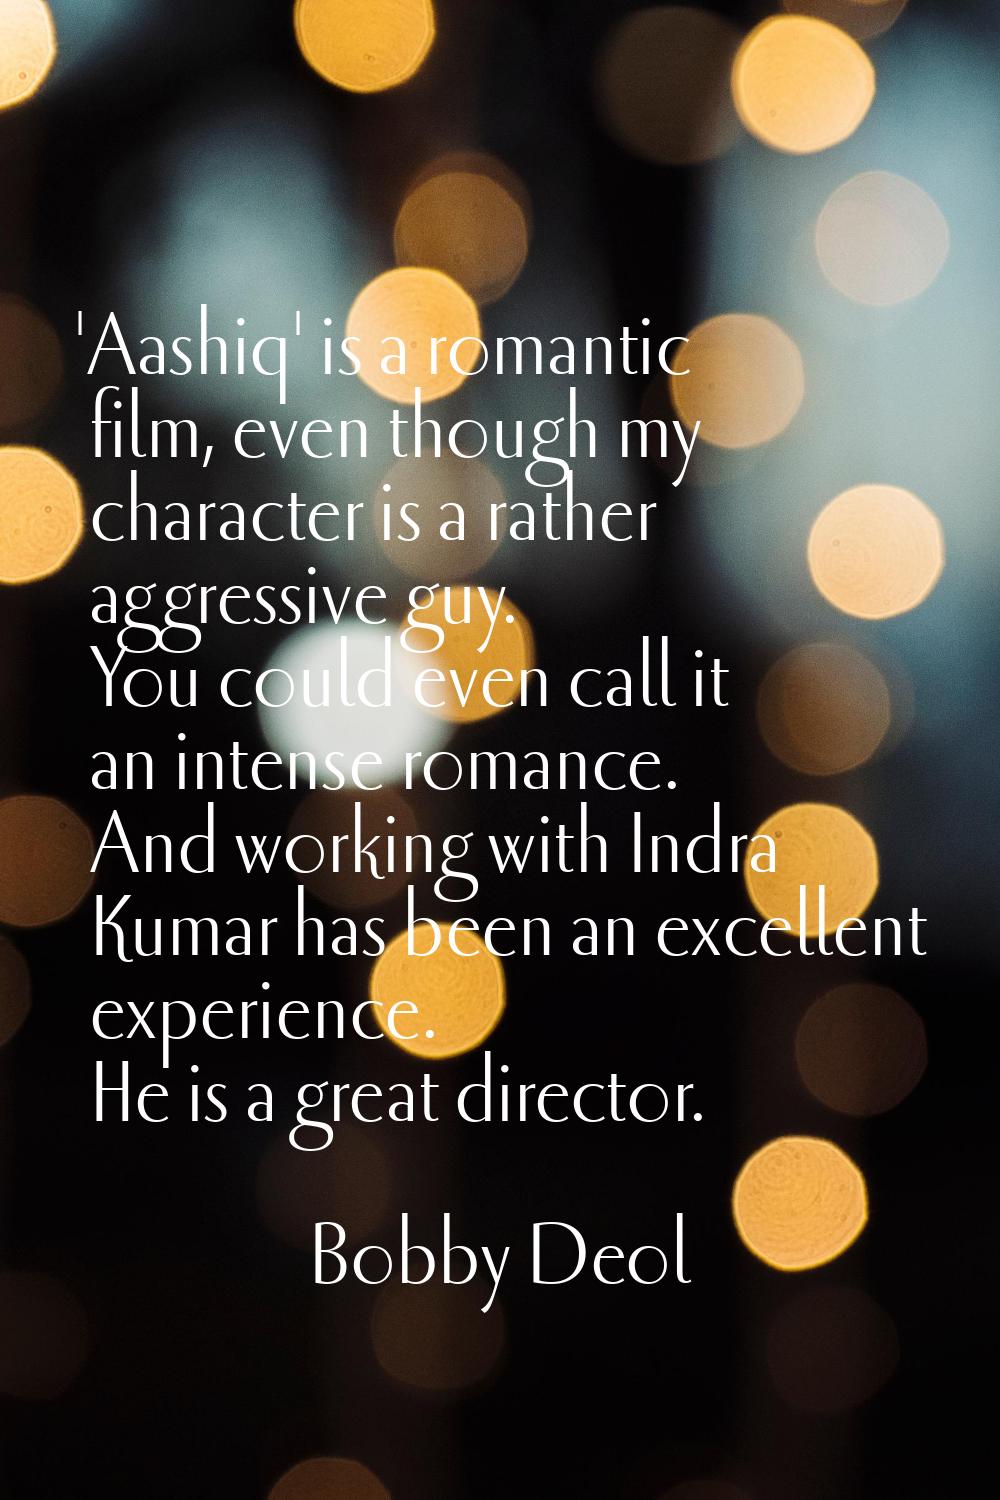 'Aashiq' is a romantic film, even though my character is a rather aggressive guy. You could even ca